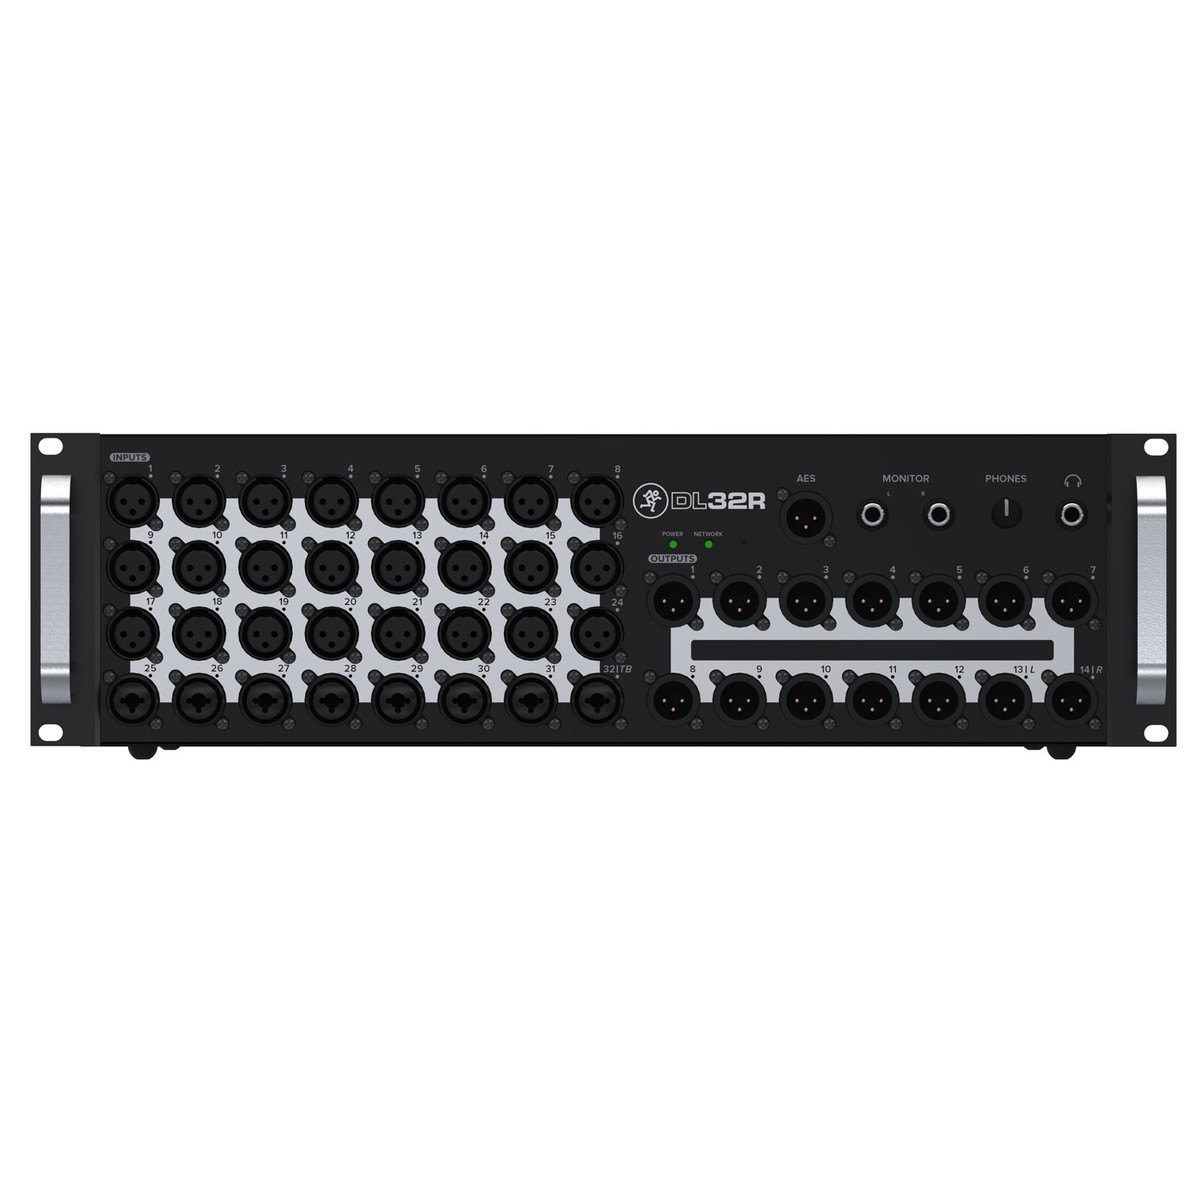 Mackie Dl32r Pour Ipad - Opnemer in rack - Variation 2